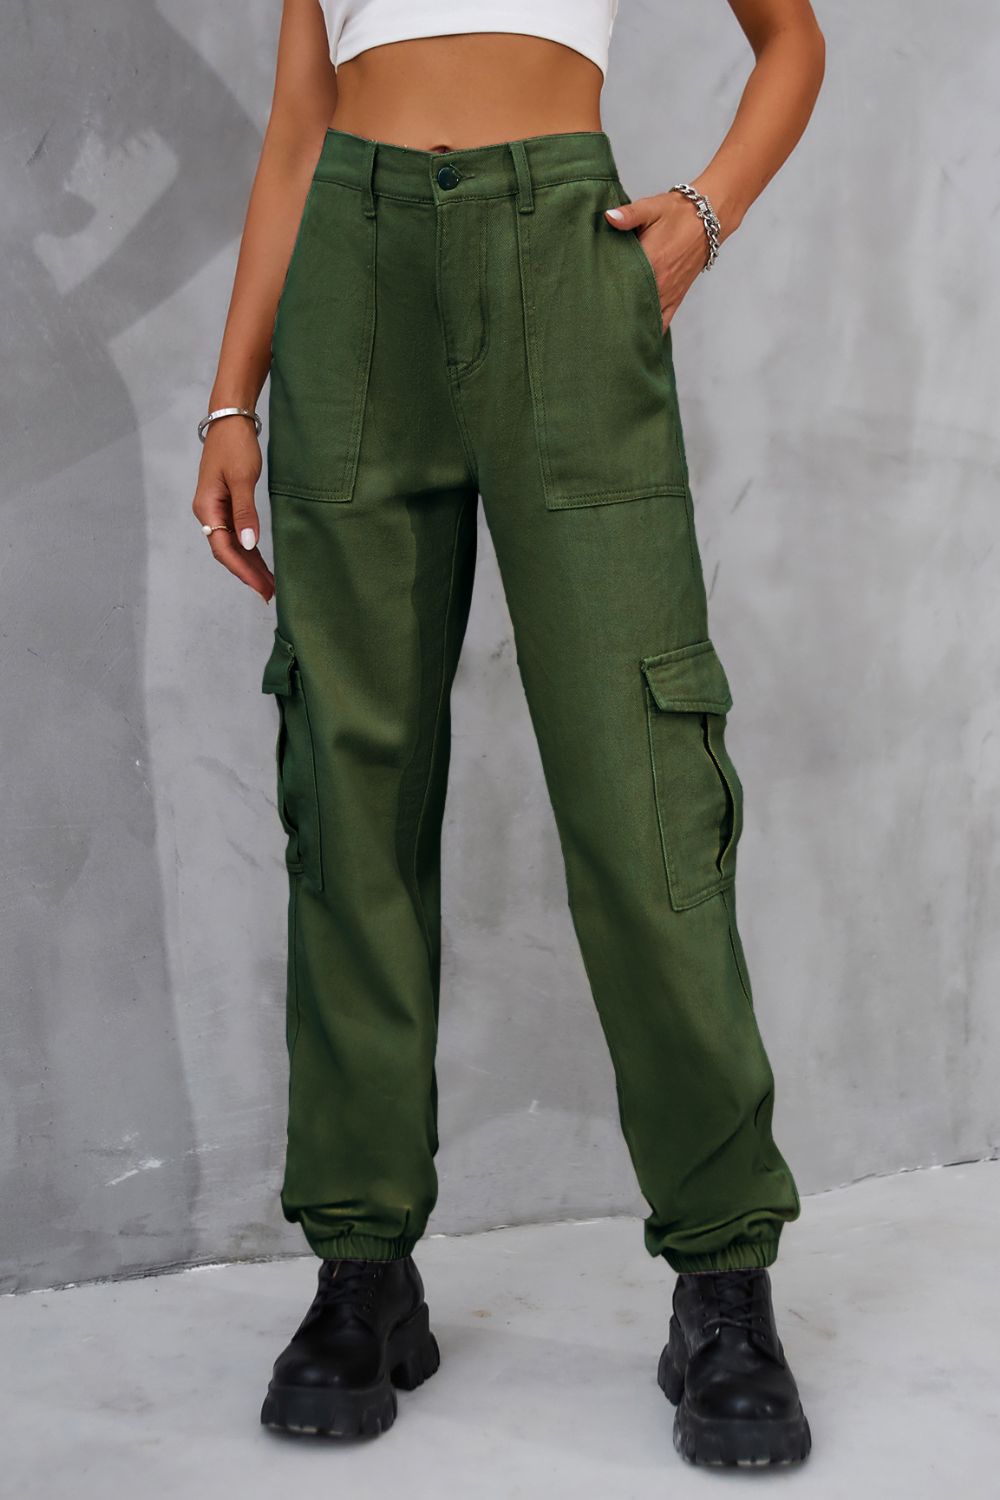 Buttoned High Waist Jeans with Pockets - Green / S - Bottoms - Pants - 1 - 2024